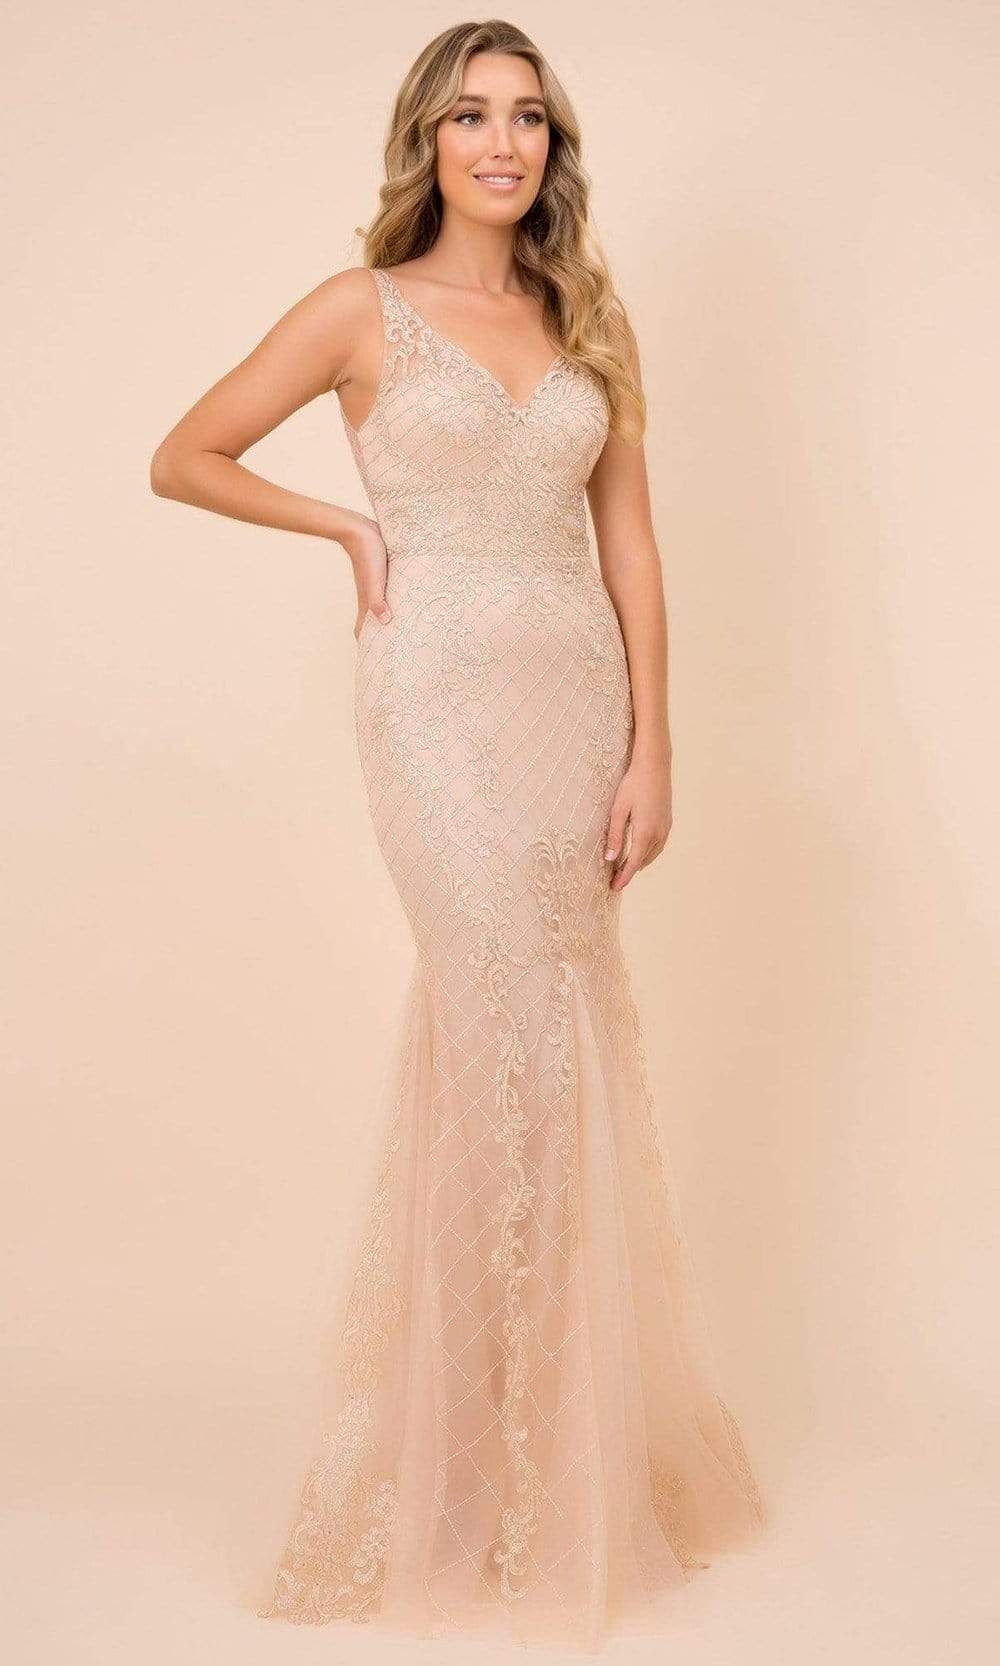 Nox Anabel - A398 Sleeveless V Neck Beaded Lace Applique Trumpet Gown Evening Dresses 4 / Gold